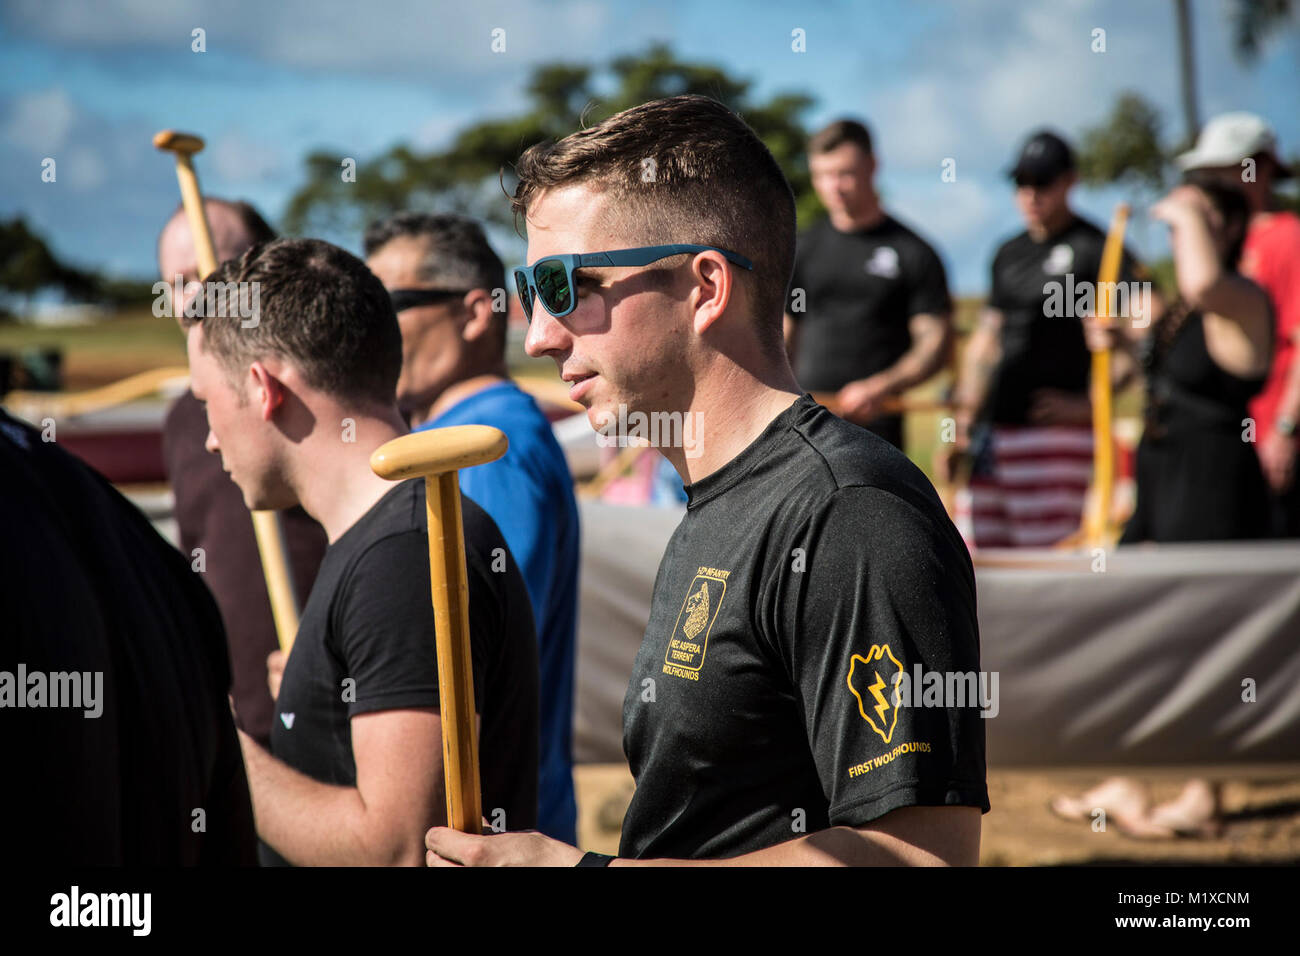 U.S. Army 2nd. Lt. Weston Iannone, assigned to 1st Battalion, 27th Infantry Regiment, 2nd Infantry Brigade Combat Team, 25th Infantry Division listens to paddle instruction before the start of the team-building exercise in Keehi Lagoon, Honolulu, Hi., Jan. 30, 2018. In an effort to strengthen international relationships, United States Army Pacific hosted personnel from the British Army to participate in a team building exercise facilitating outrigger canoeing. (U.S. Army Stock Photo